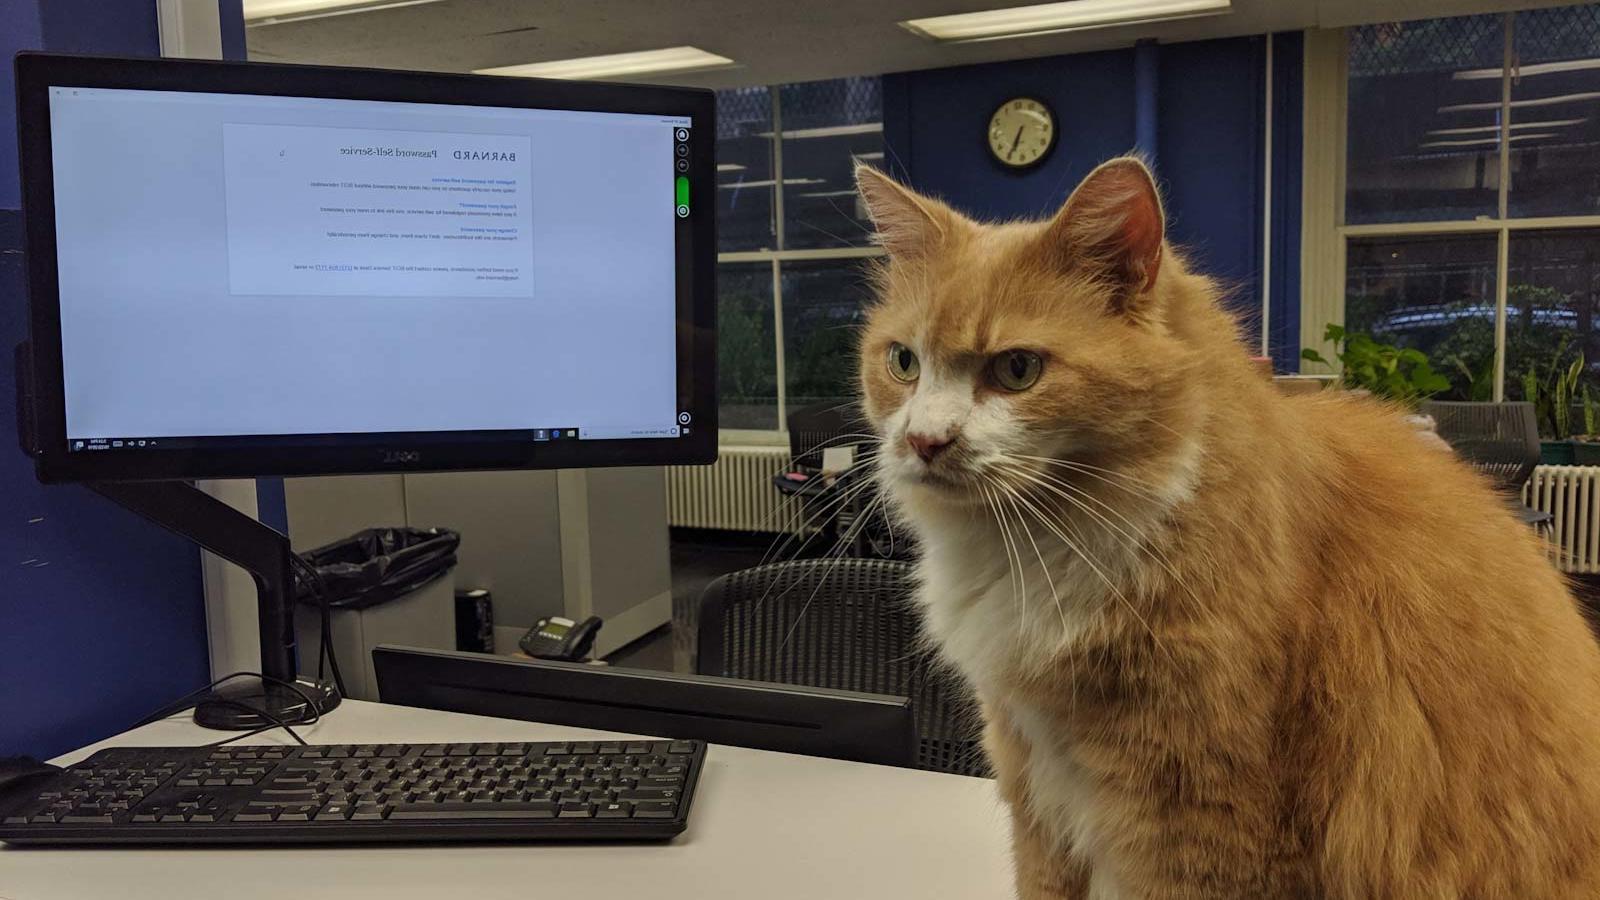 Fluffy orange and white cat sits on a desk next to a computer